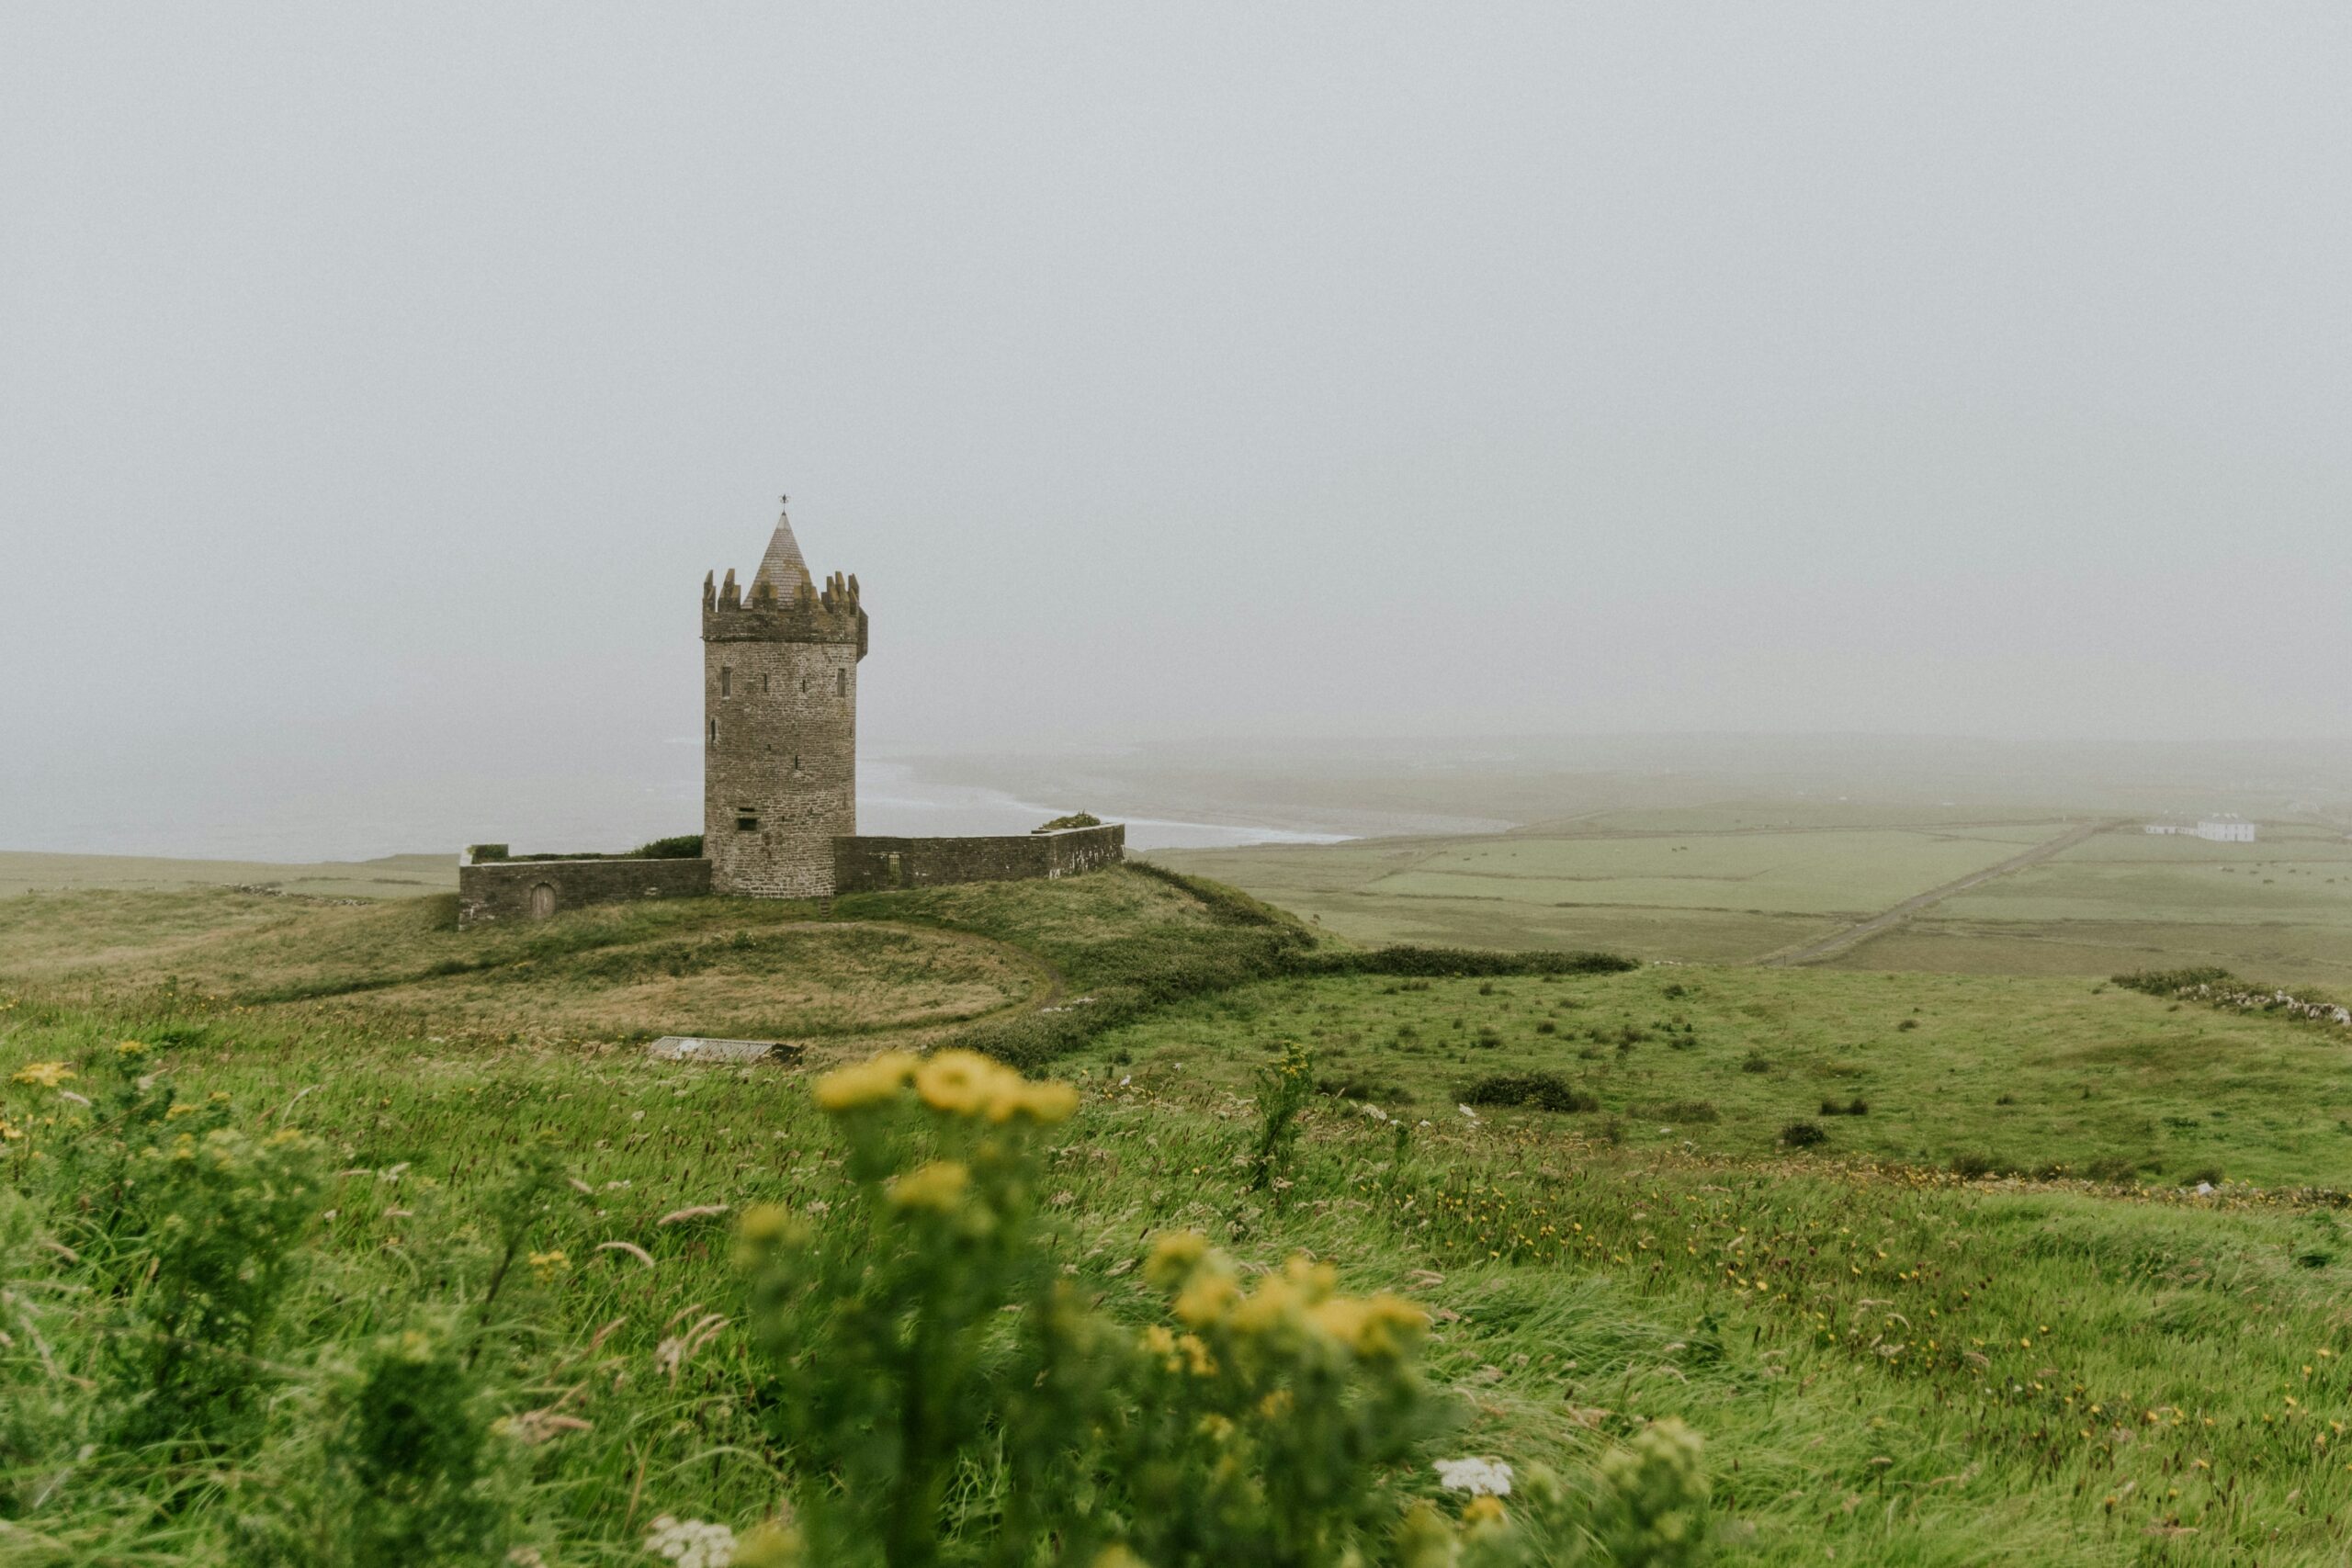 Check out this historic town and what travelers can see. 
pictured: a castle in the countryside of Ireland